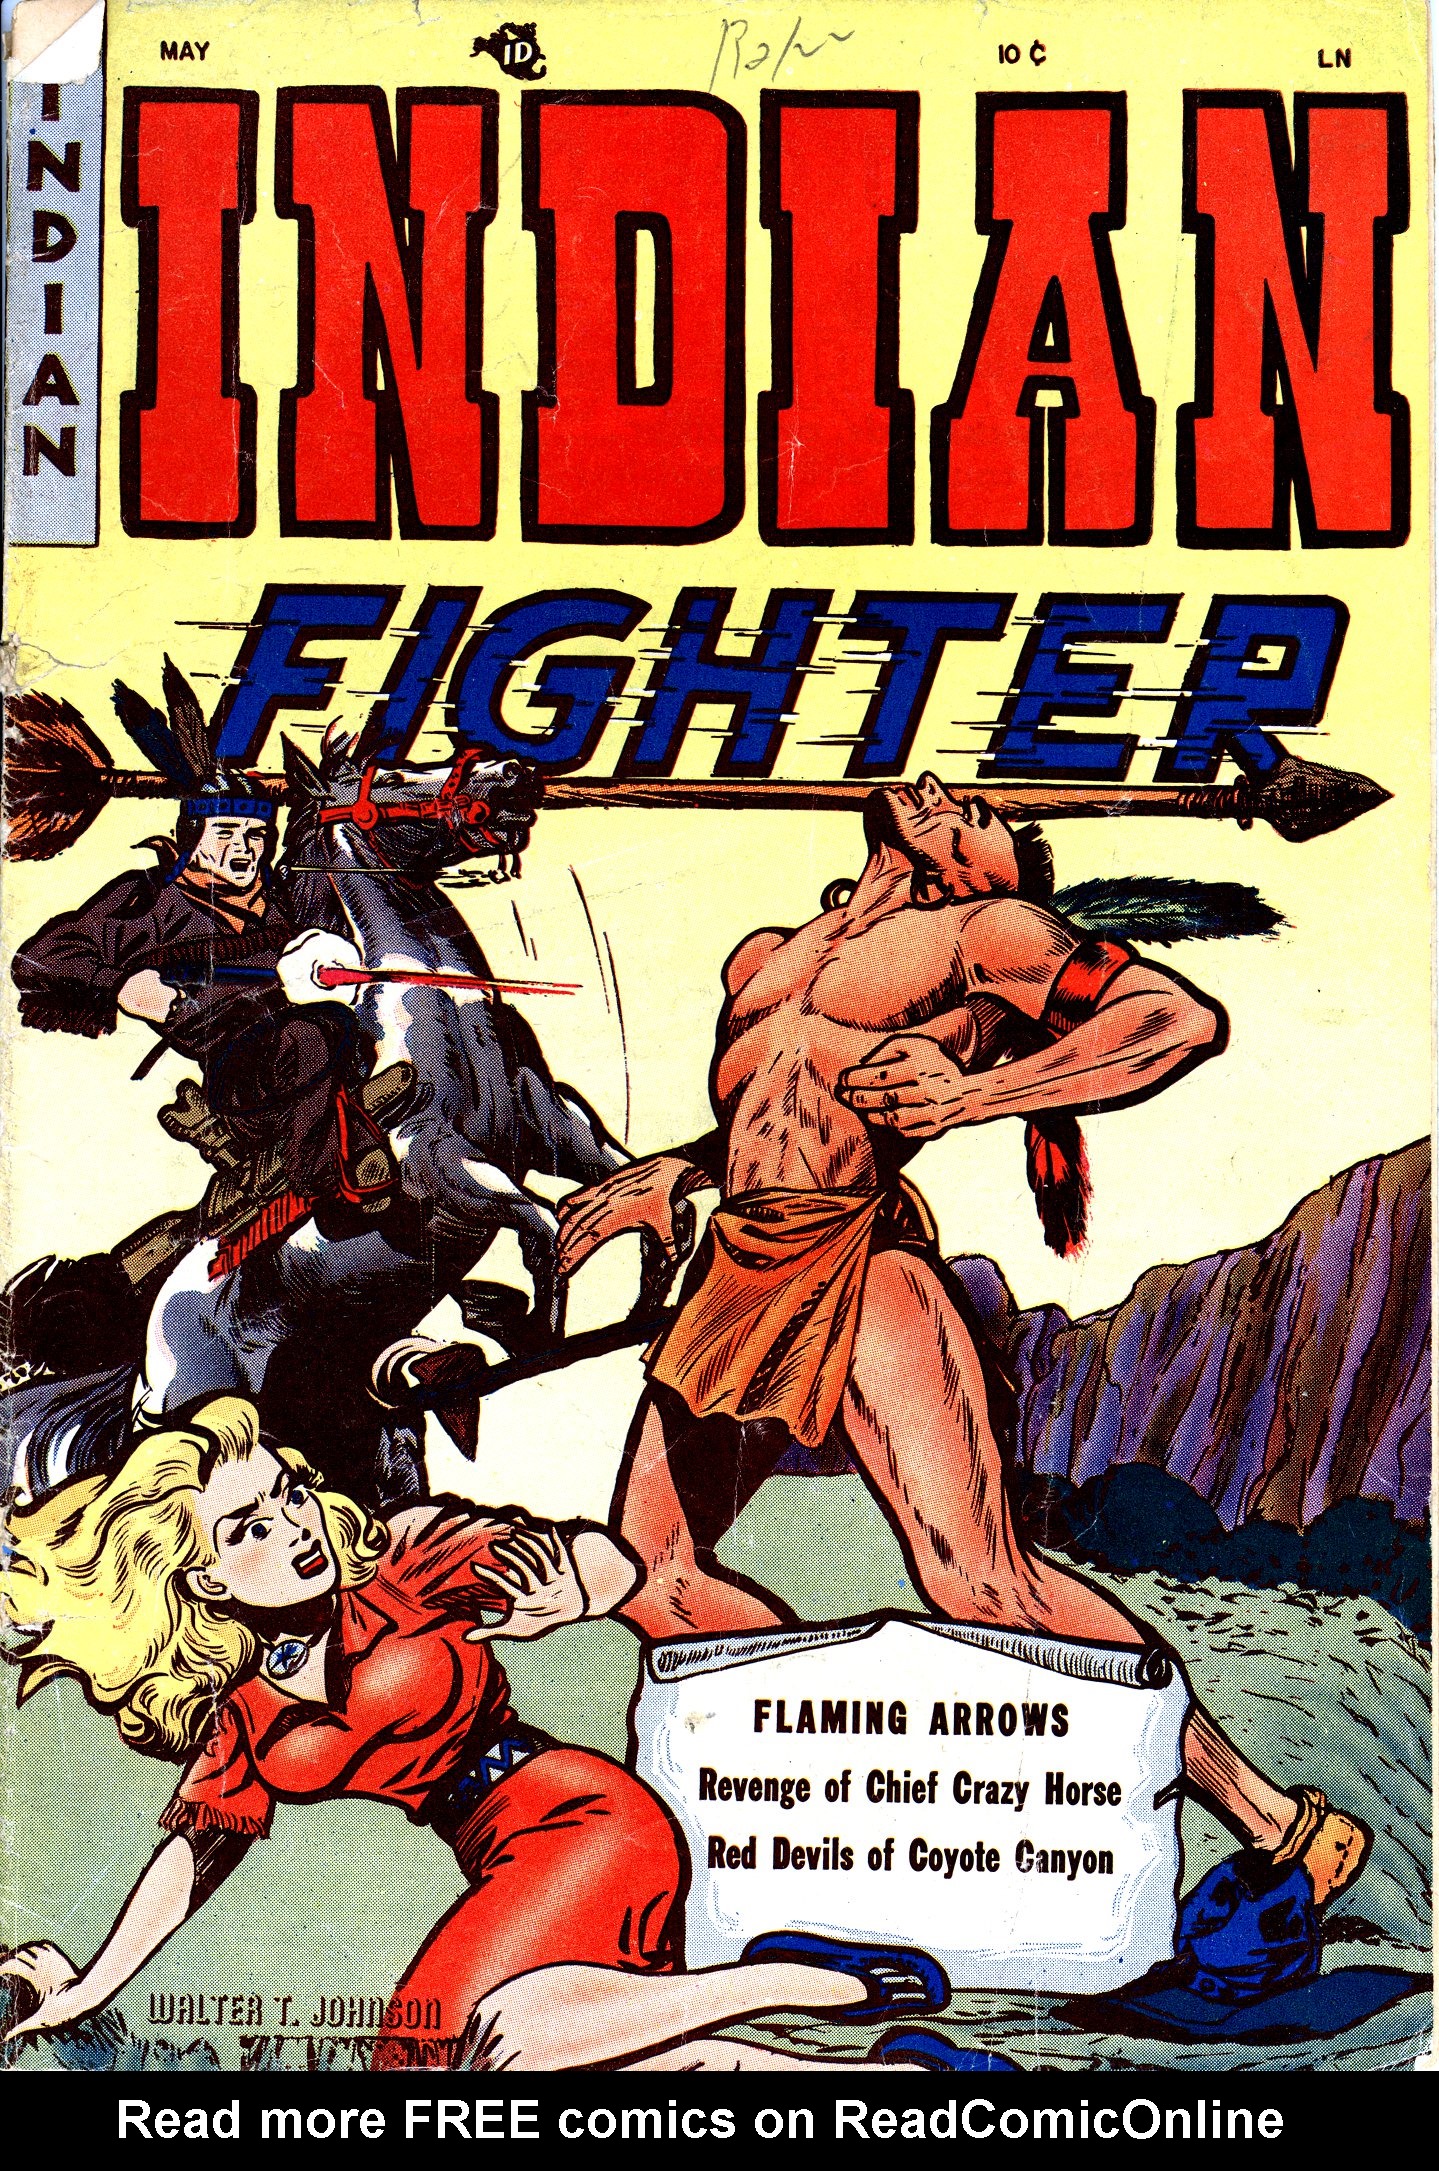 Read online Indian Fighter comic -  Issue #1 - 1